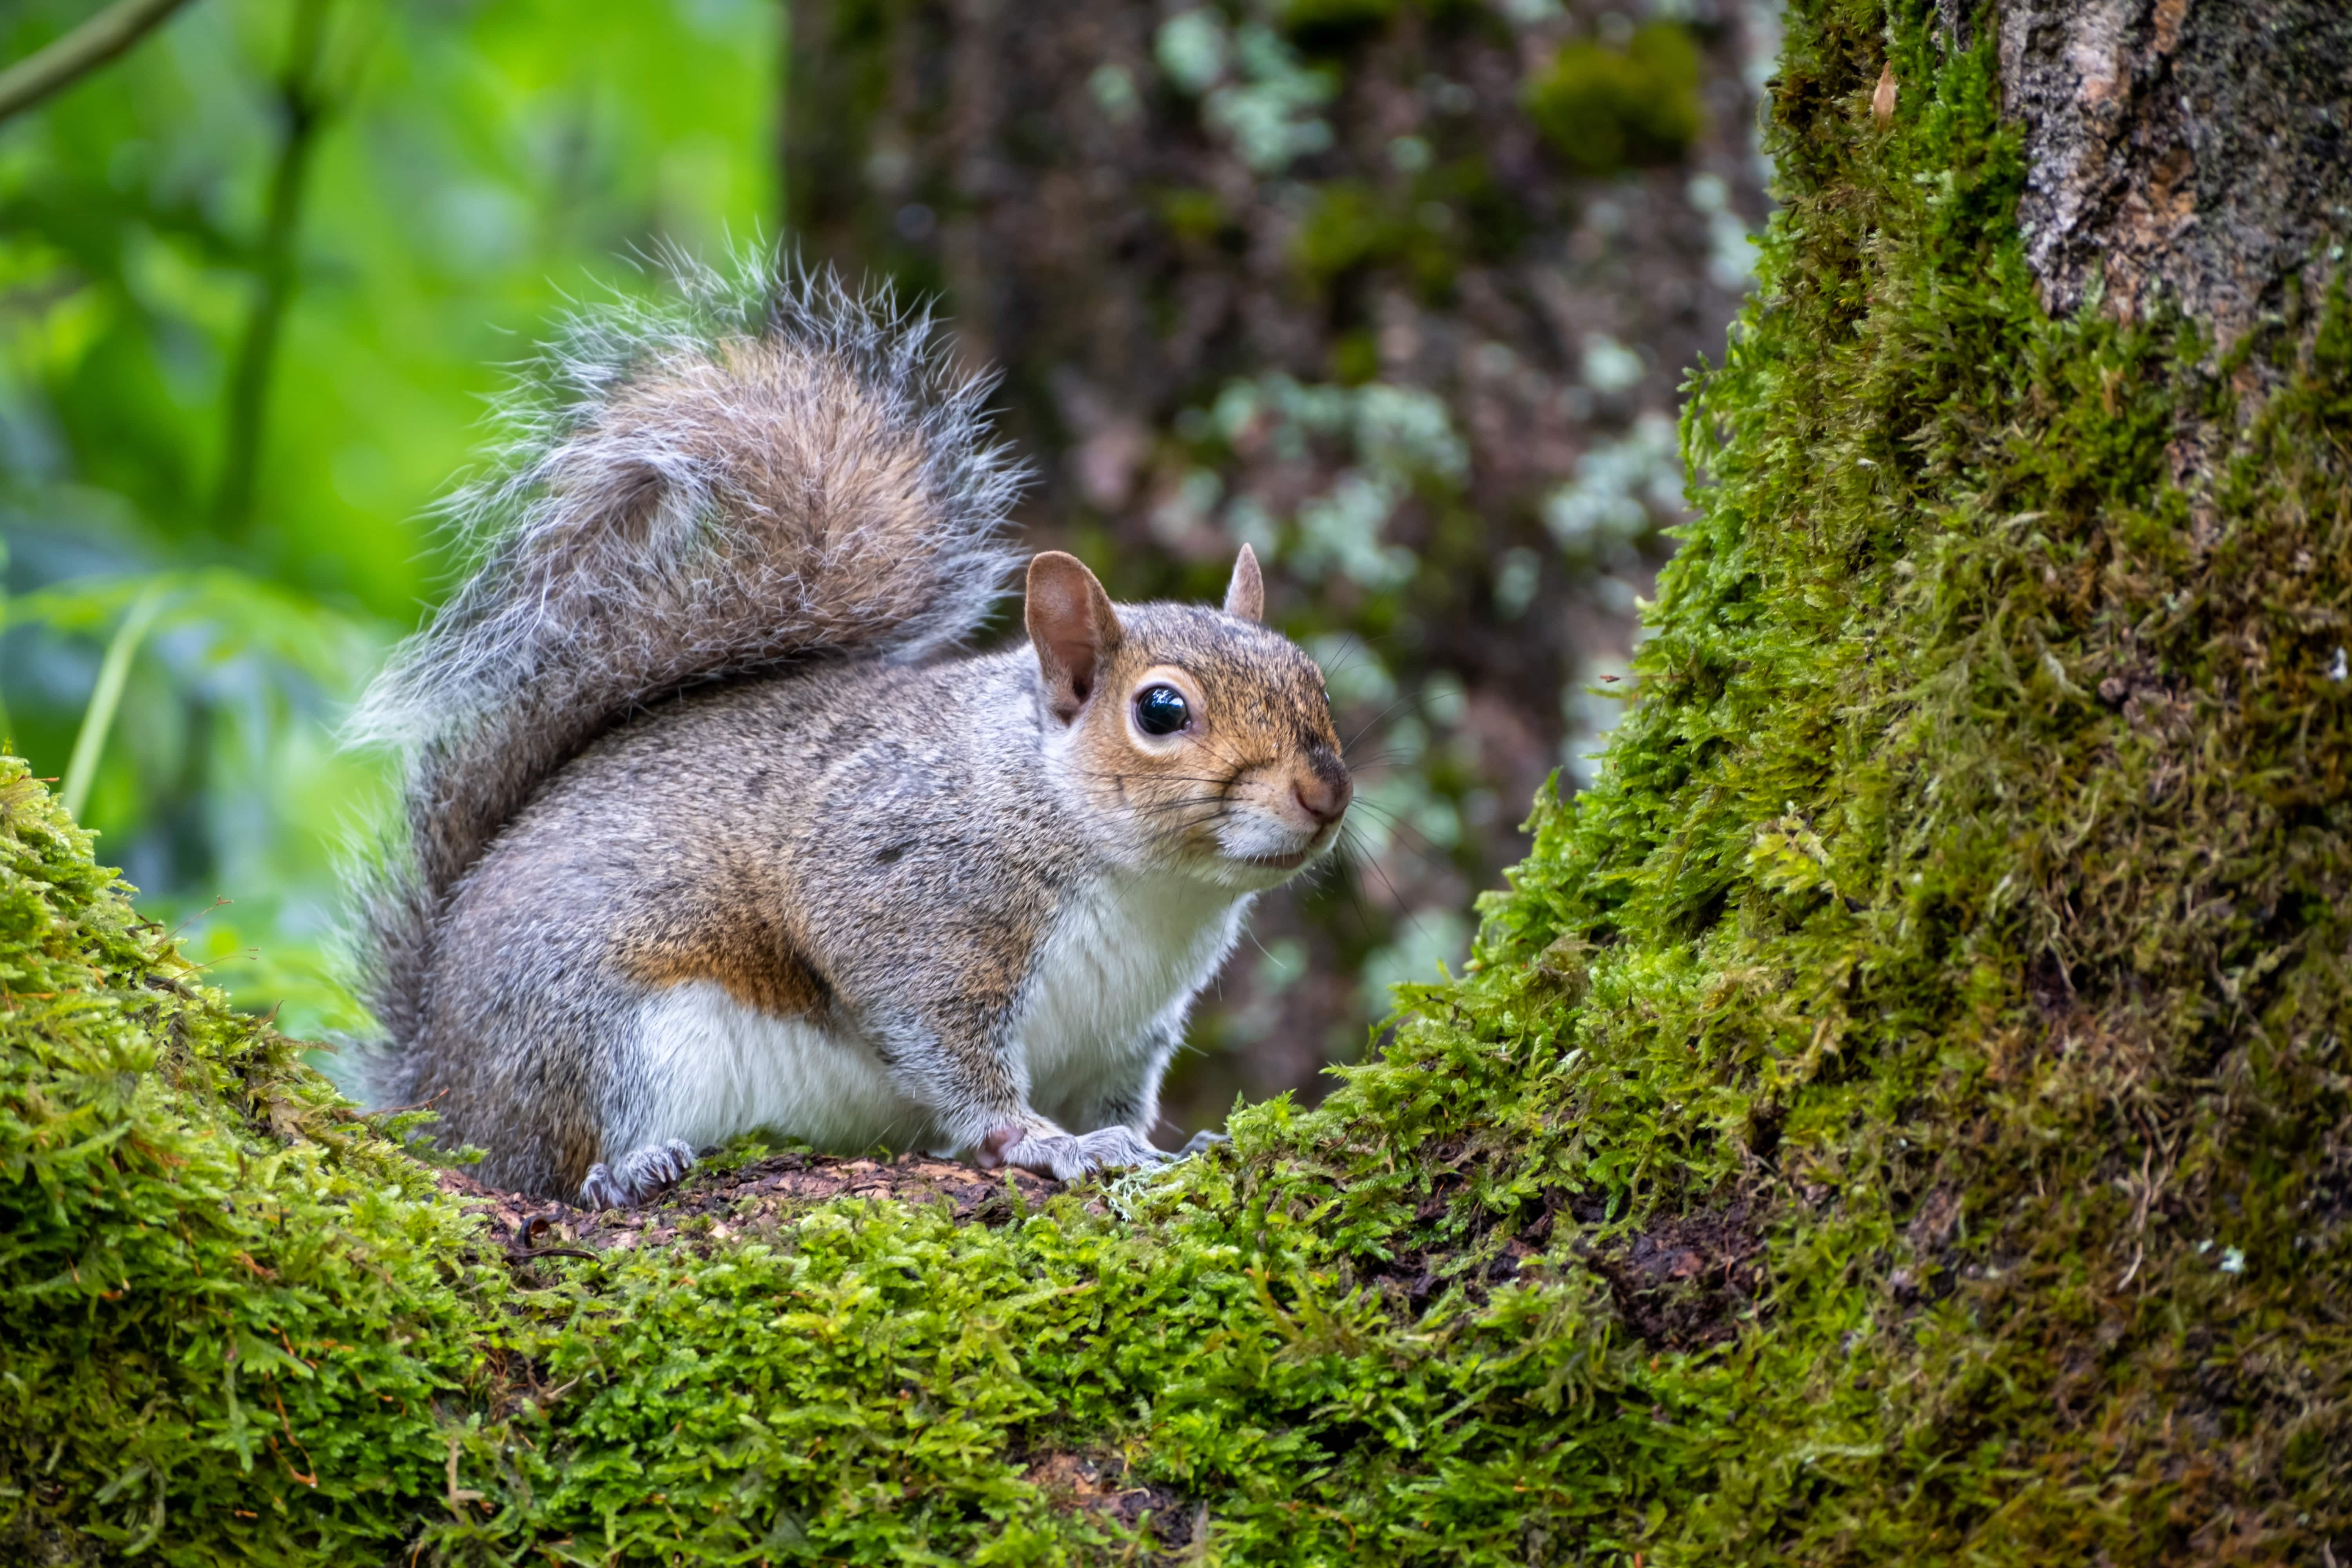 A grey squirrel, which is an invasive species